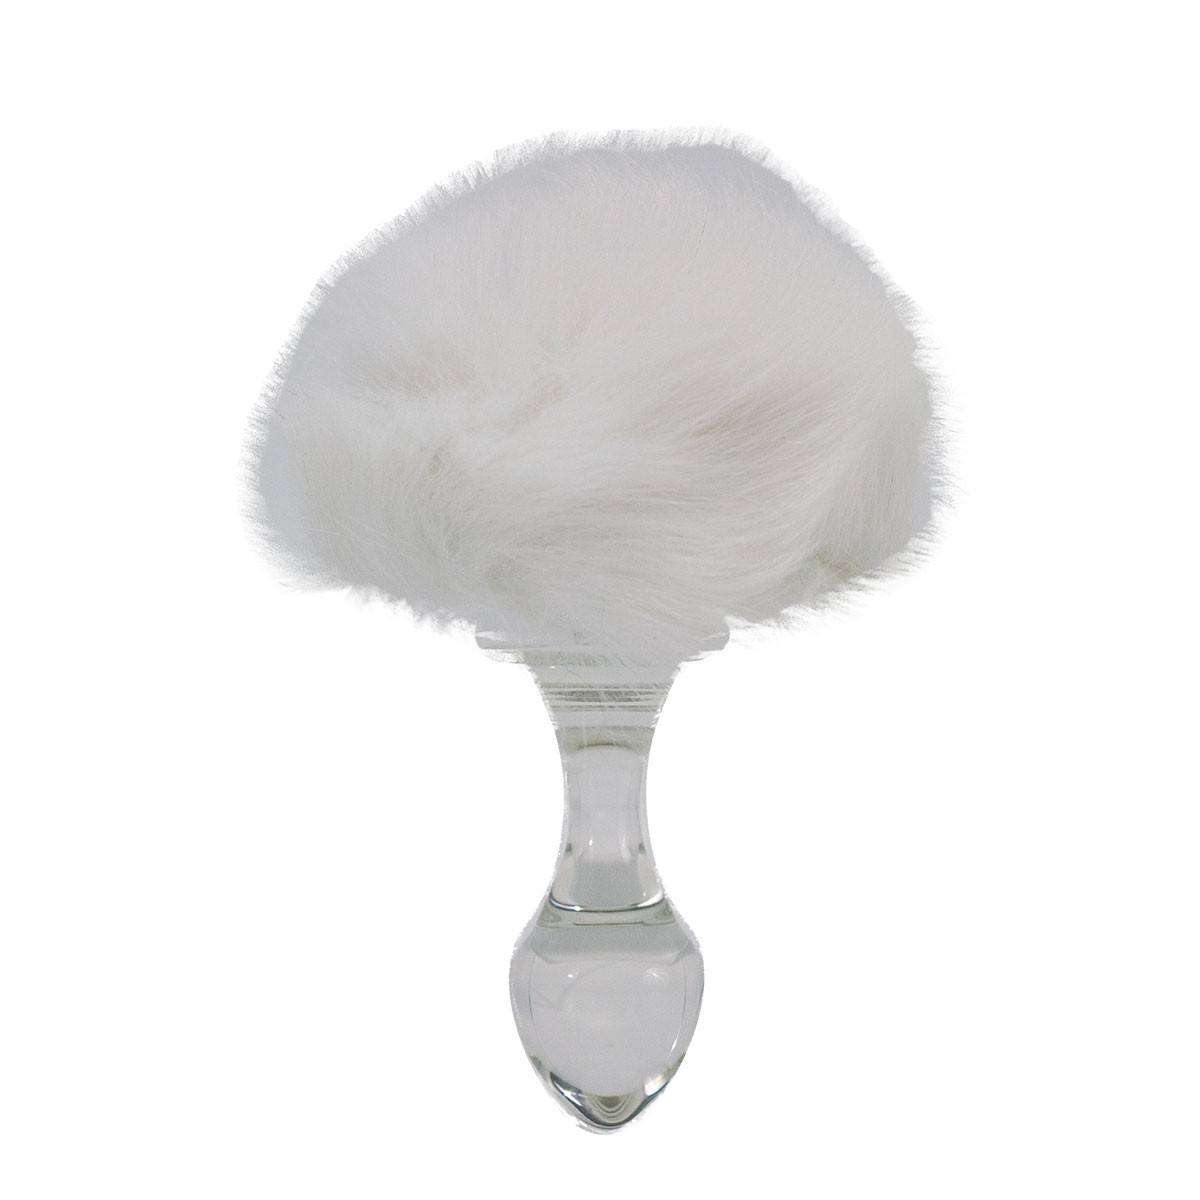 Magnetic Bunny Tail Glass Butt Plug By Crystal Delights - Hamilton Park Electronics